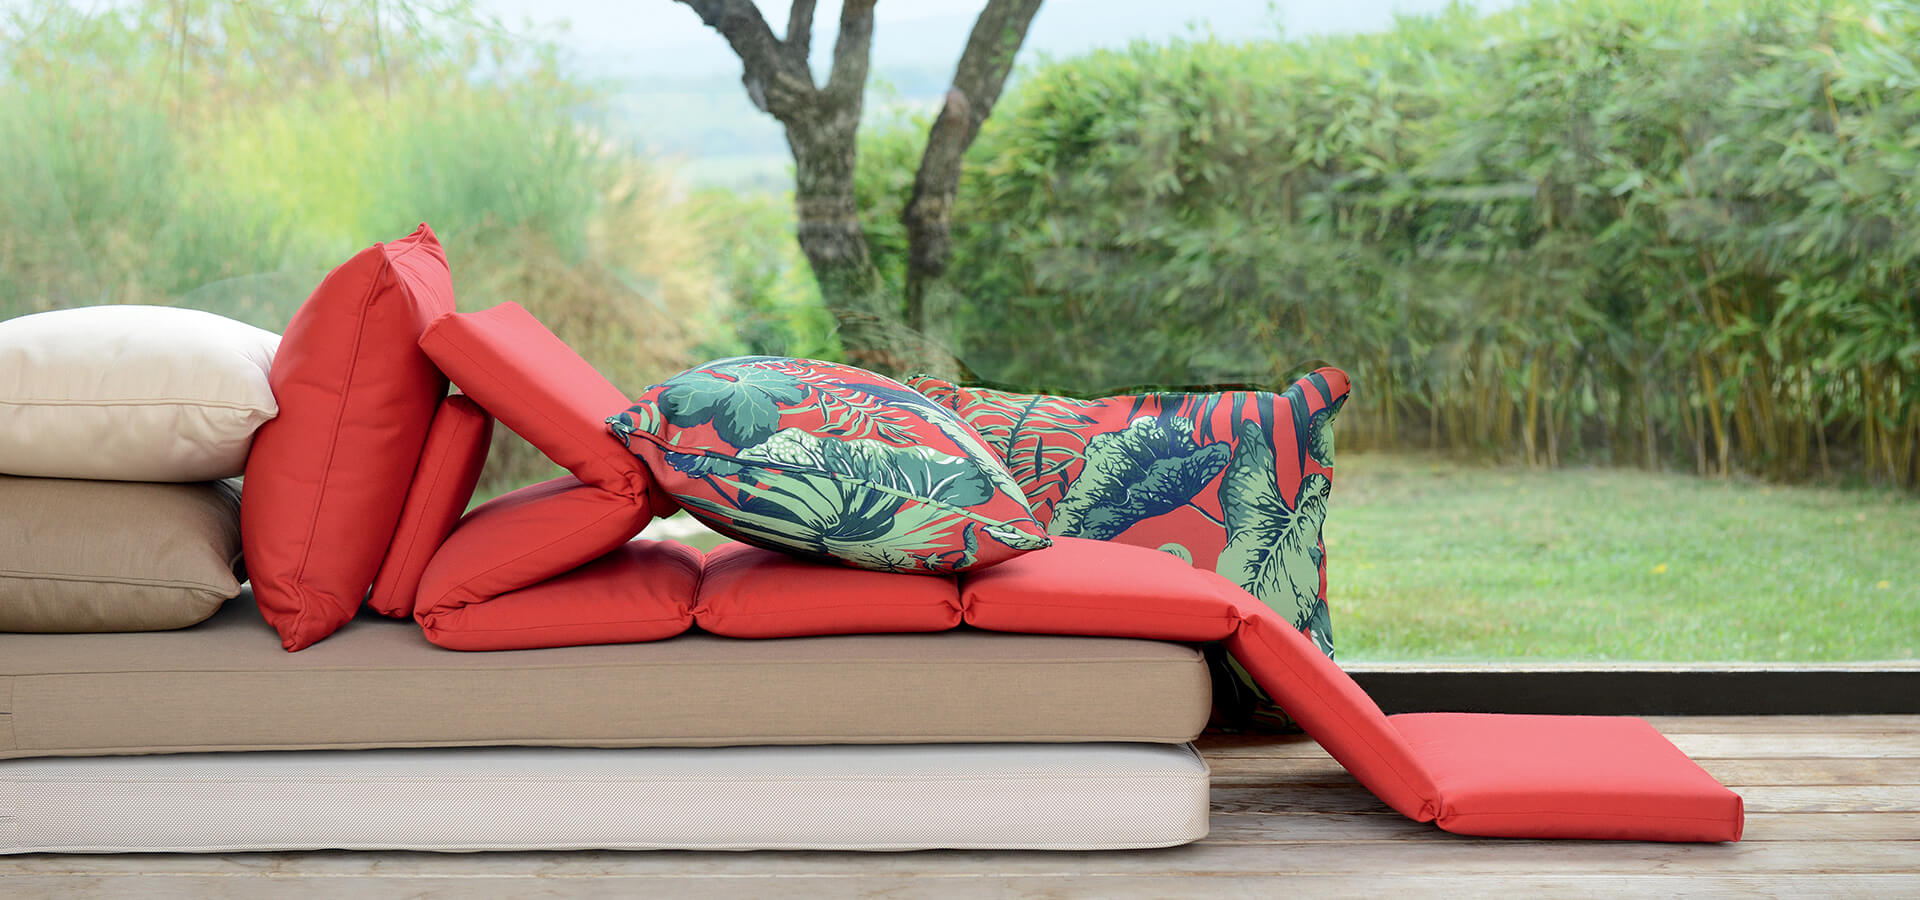 How to maintain your outdoor cushions